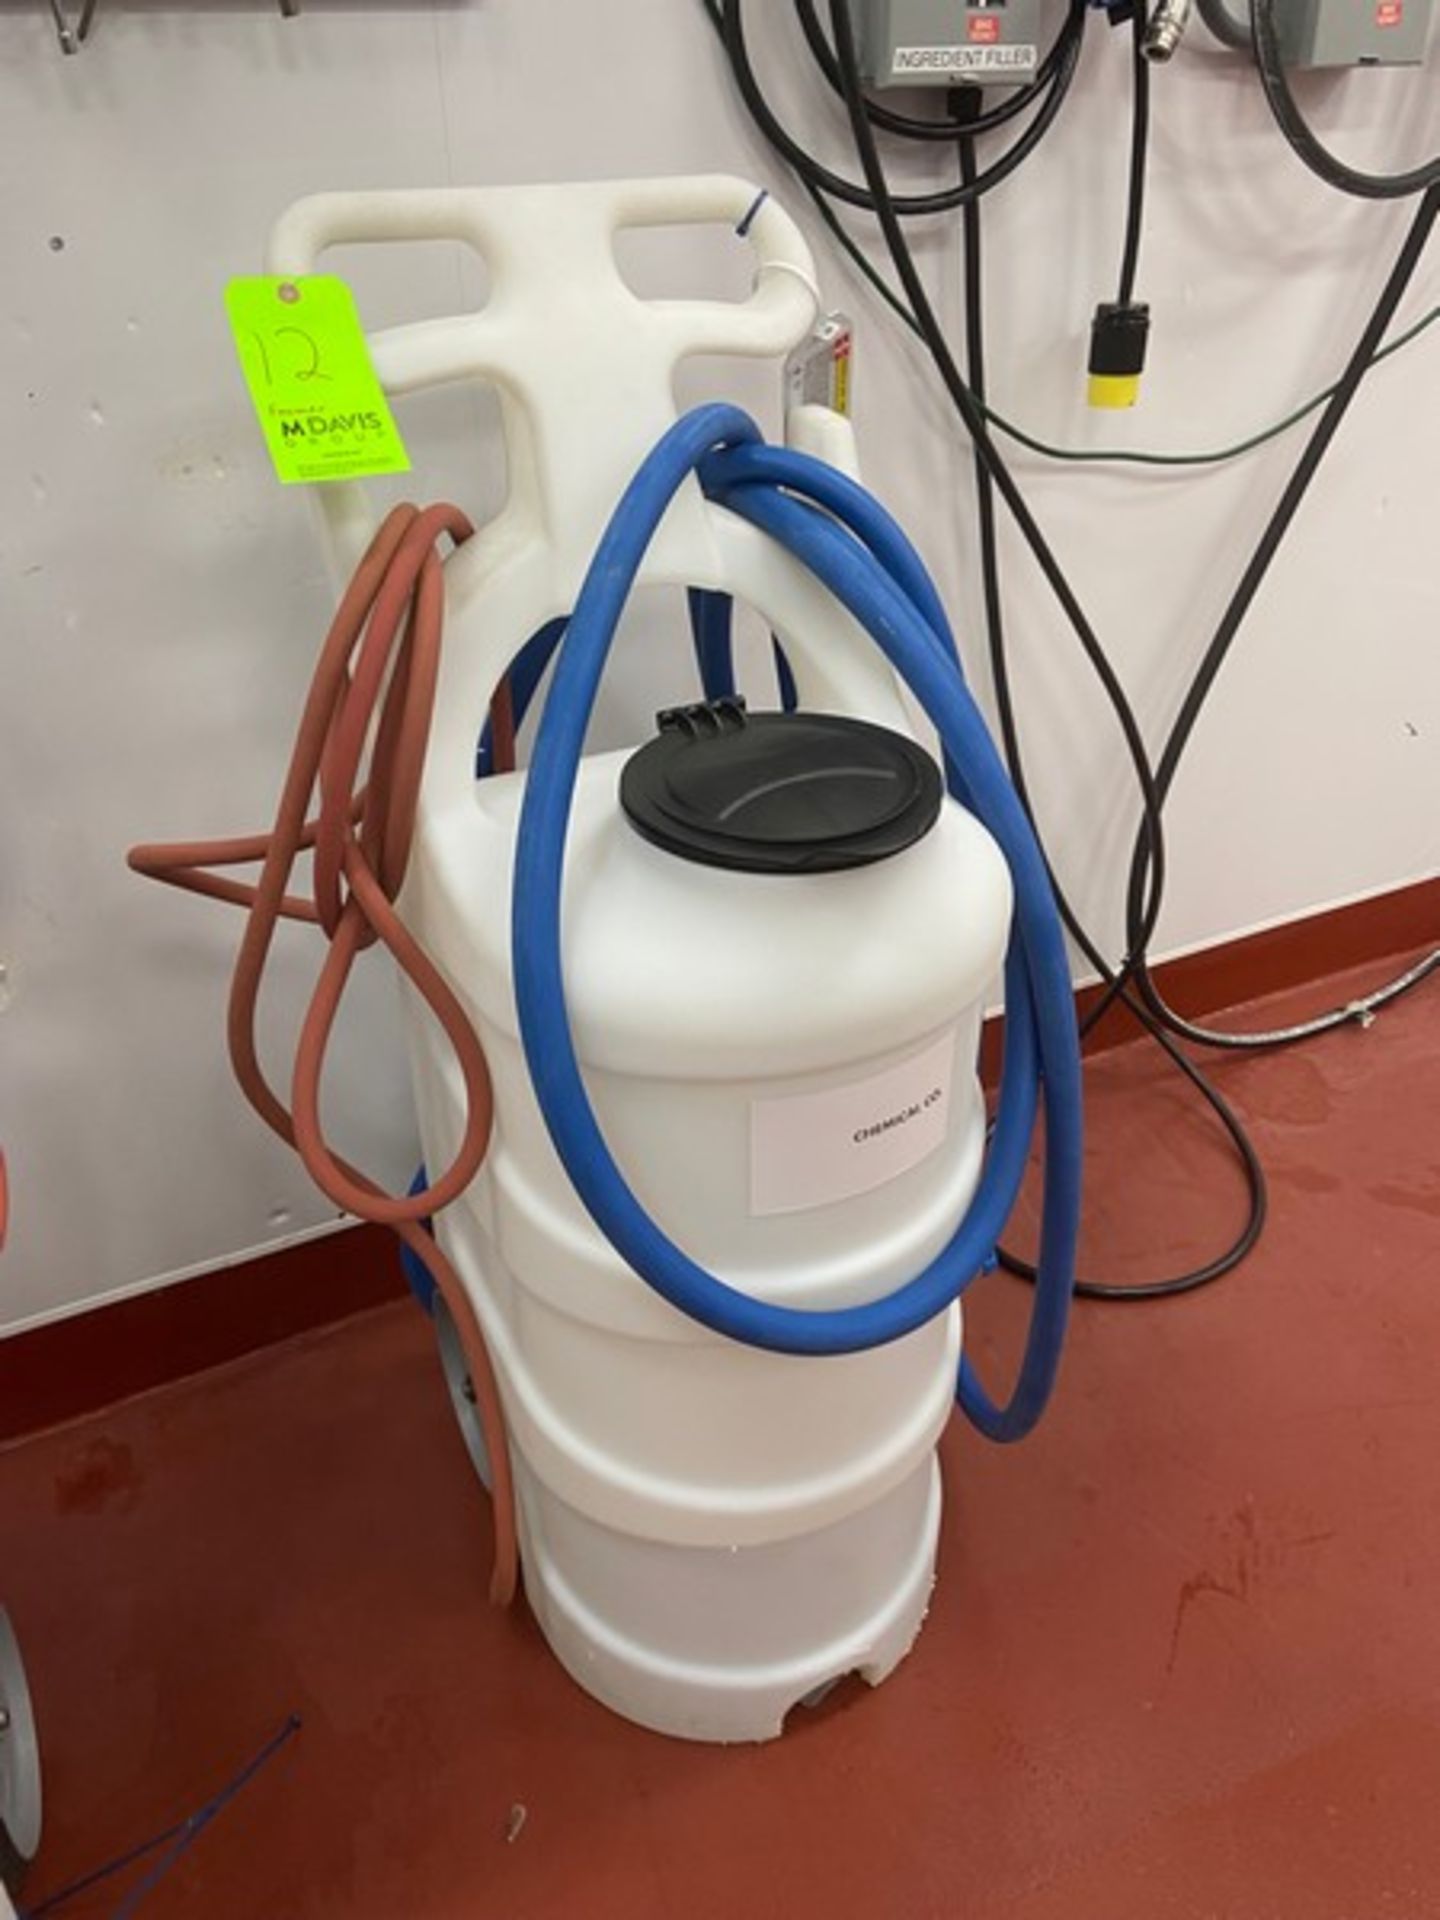 Hydrite Chemical Co. Portable Foamer, Plastic Design, Mounted on Casters, with Associated Hoses &